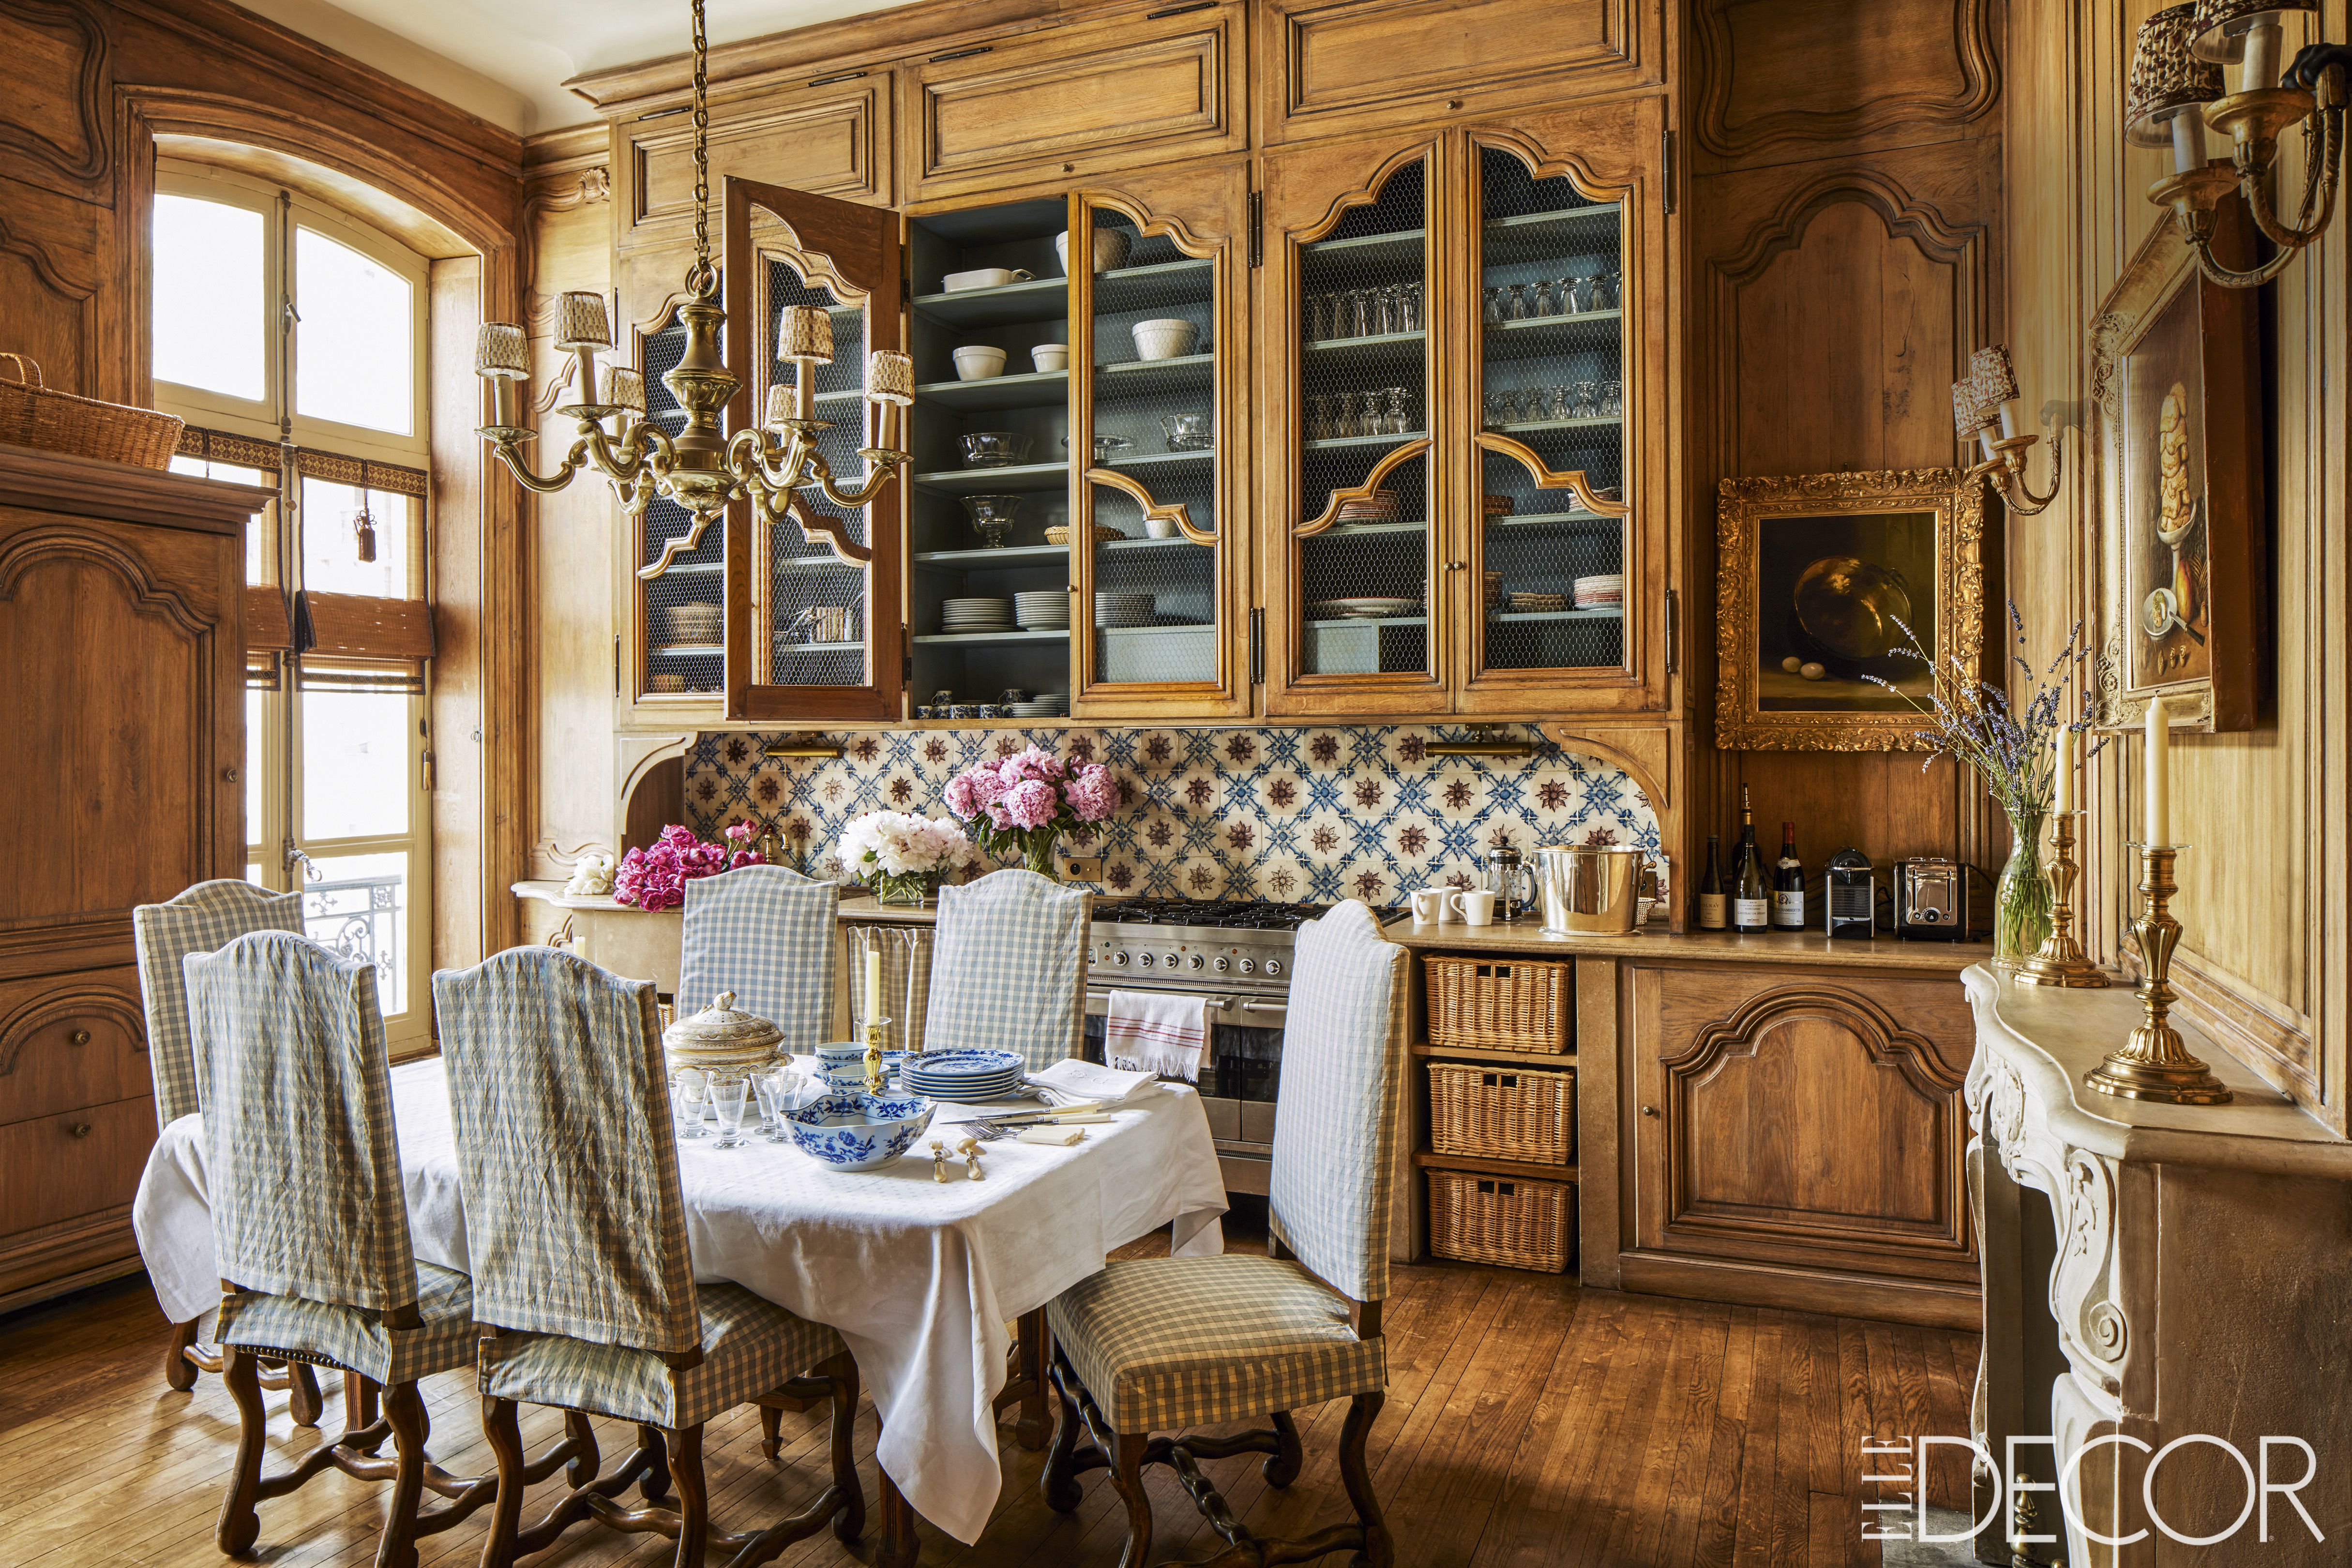 French Country Style Interiors - Rooms with French Country Decor